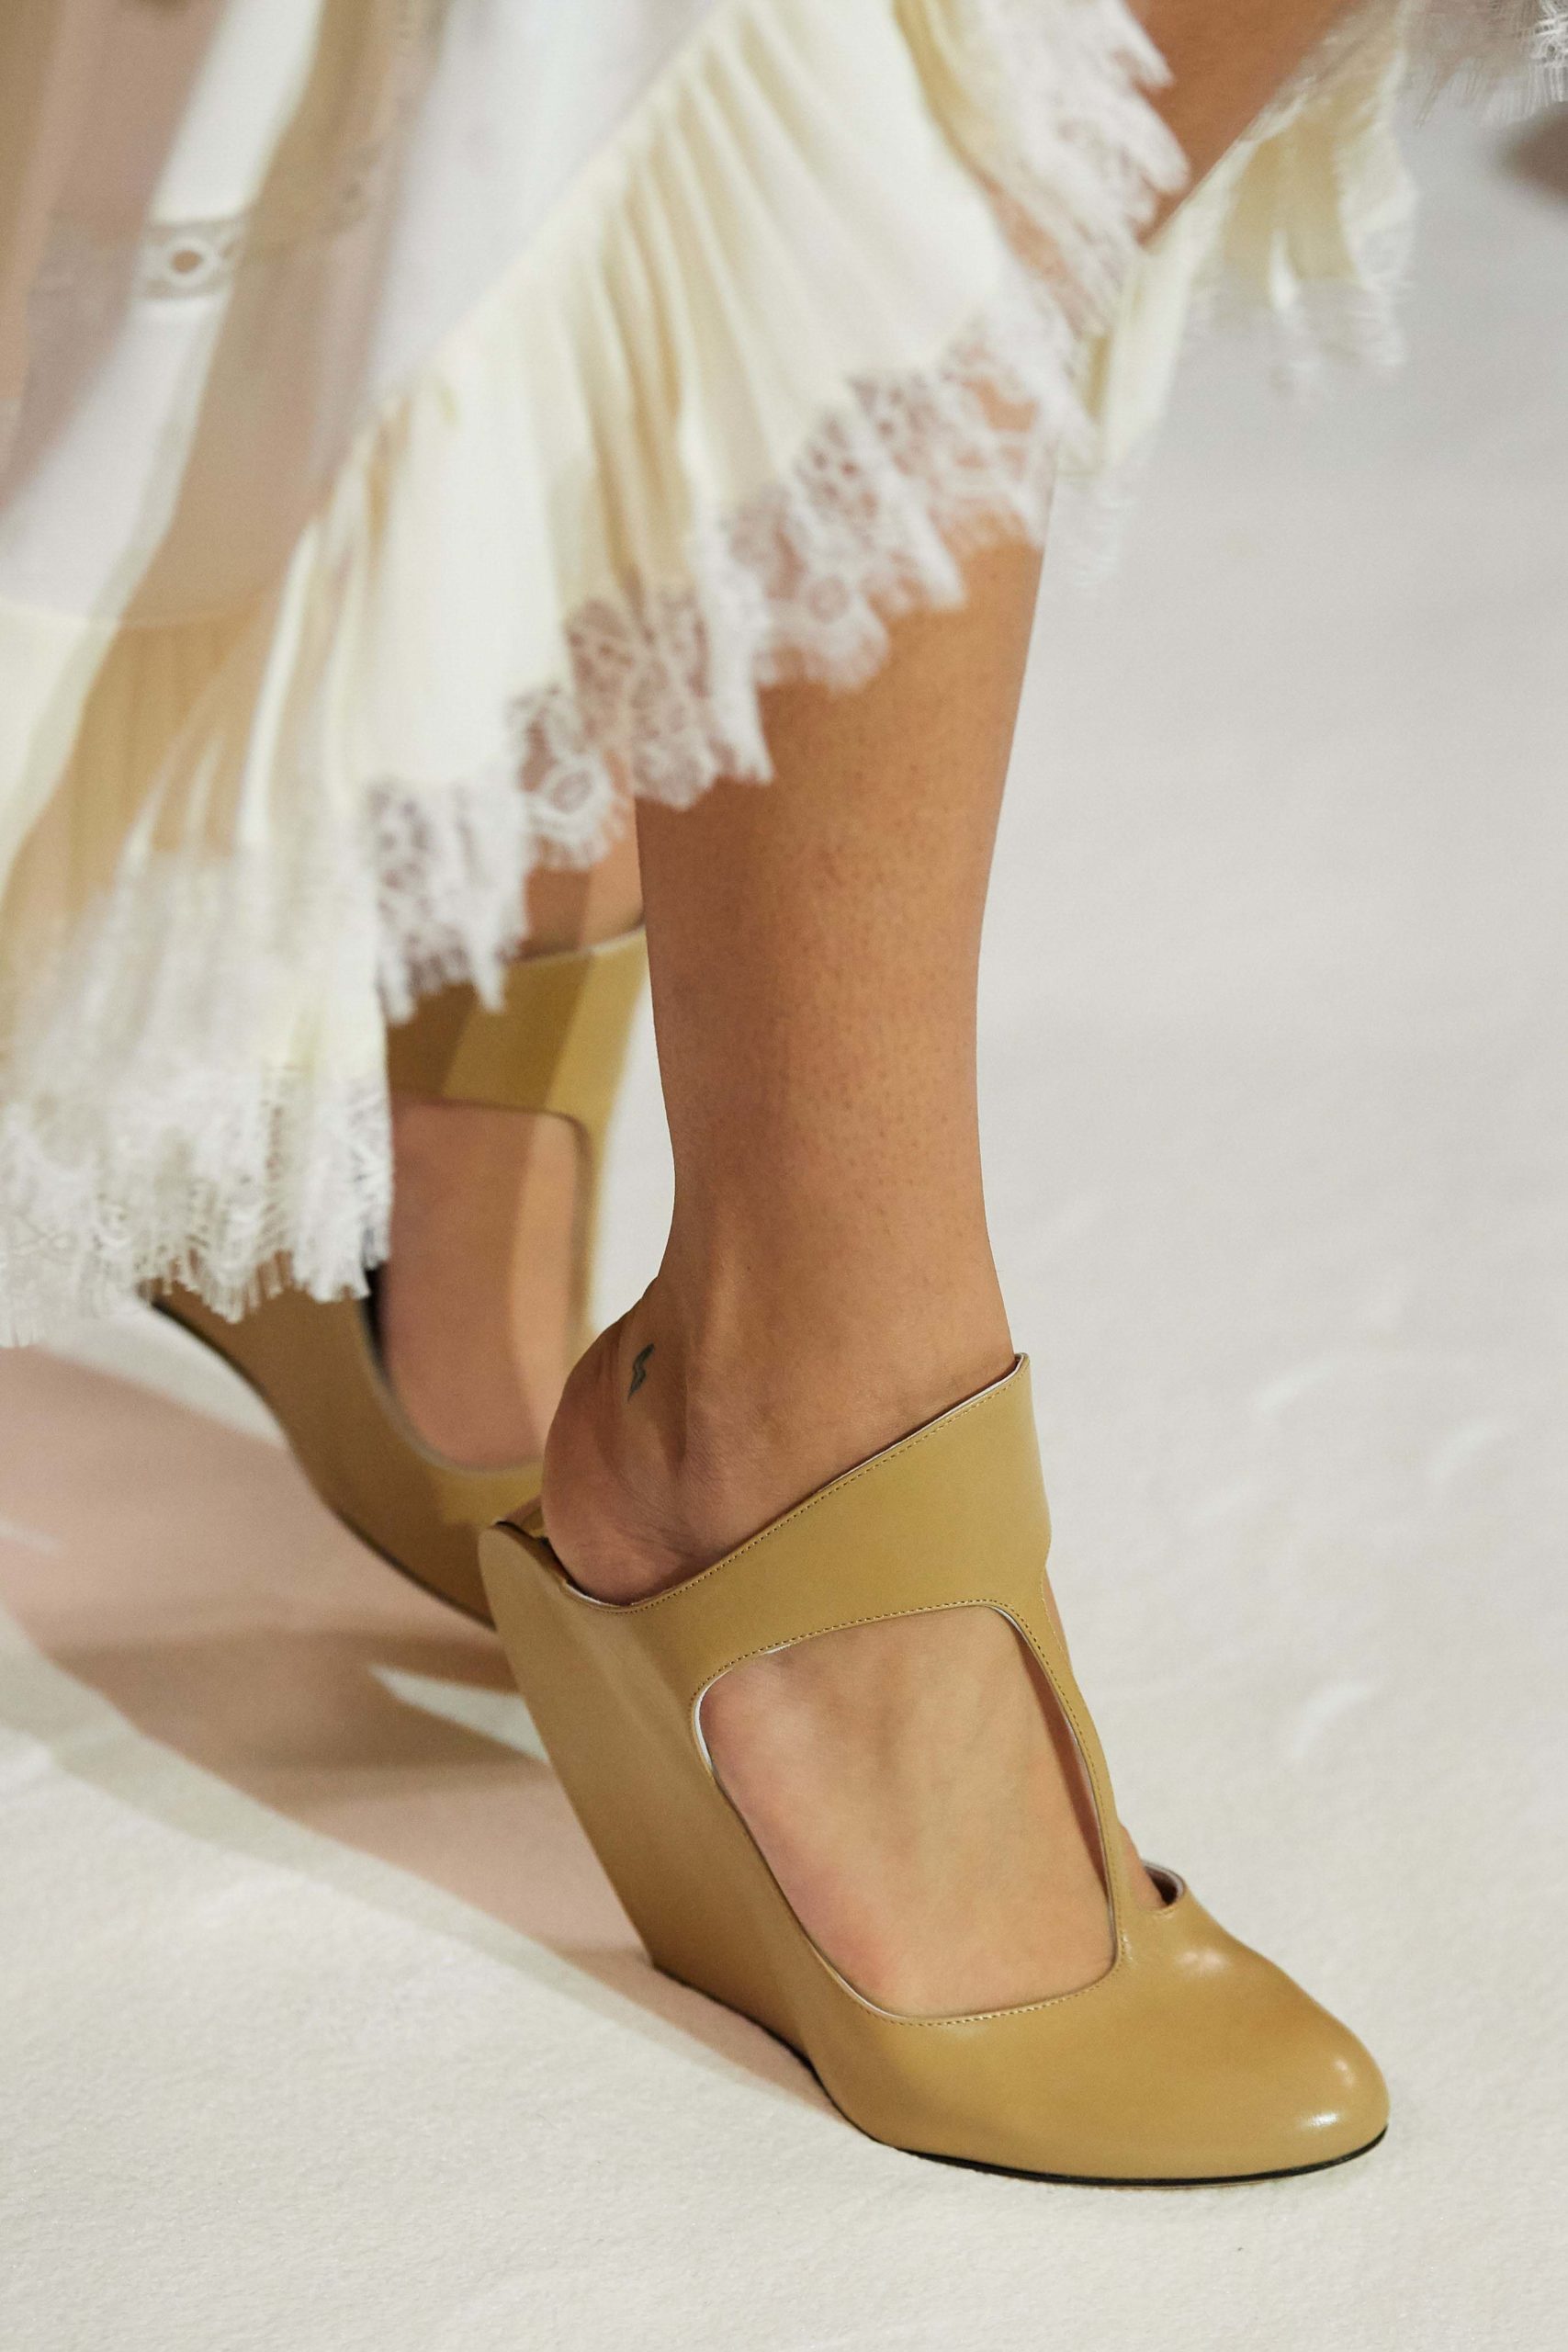 Lanvin Fall 2020 trends runway coverage Ready To Wear Vogue platform shoes